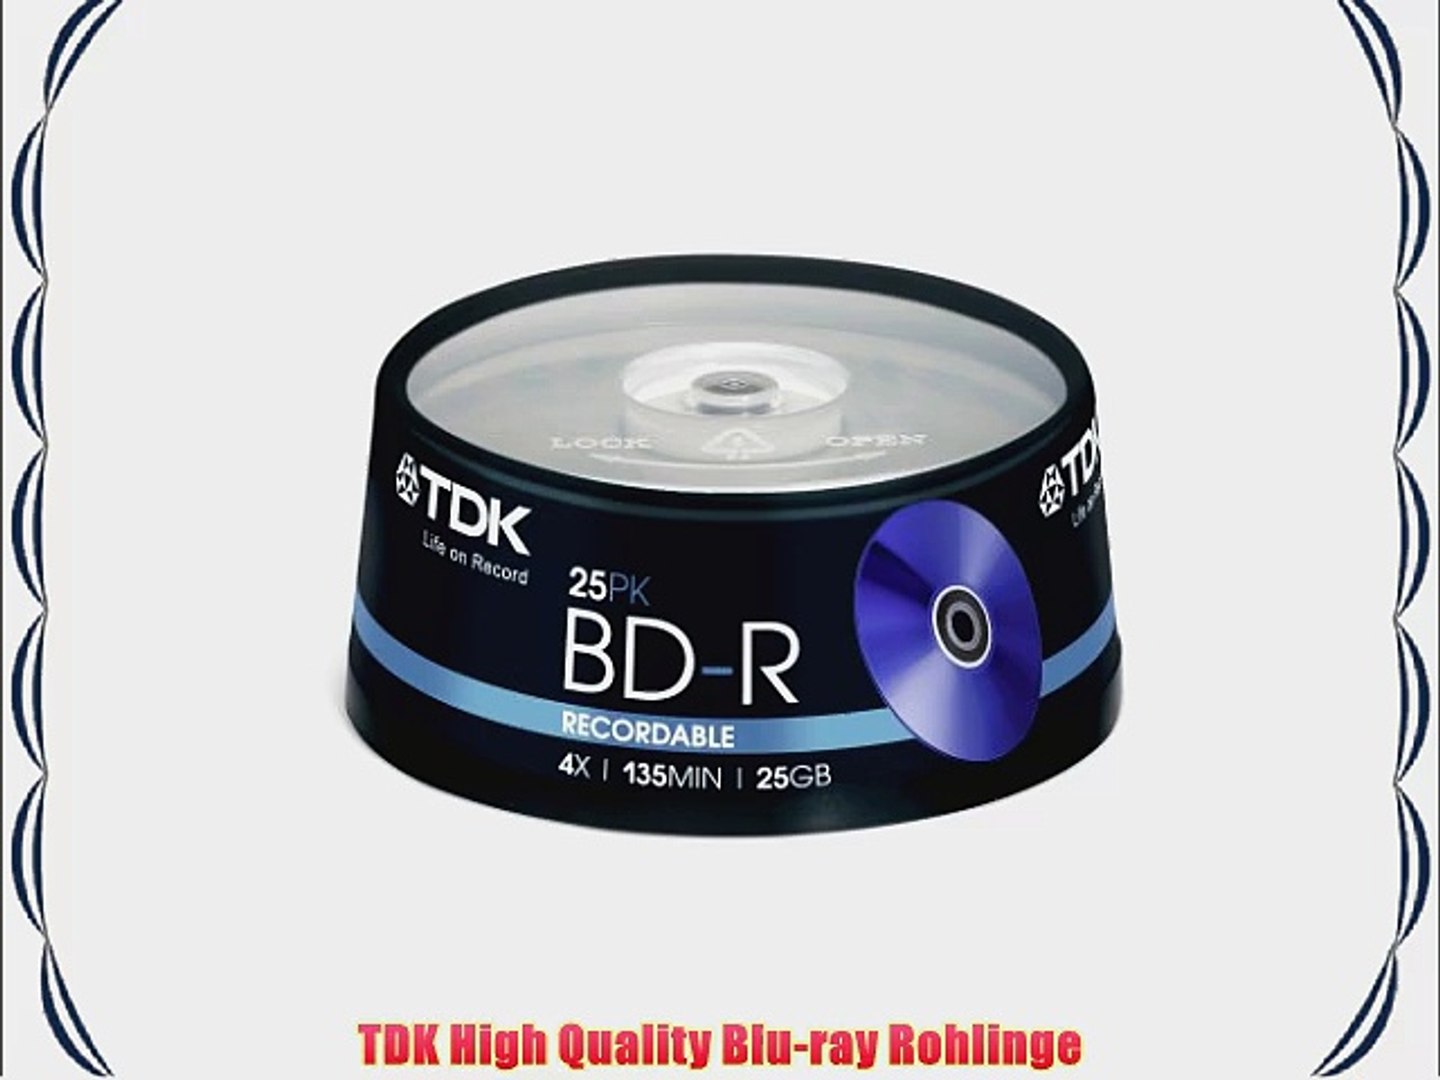 TDK T78301 BD-R Blu-ray Rohlinge 25GB in Cakebox 4x Speed 25 St/ück